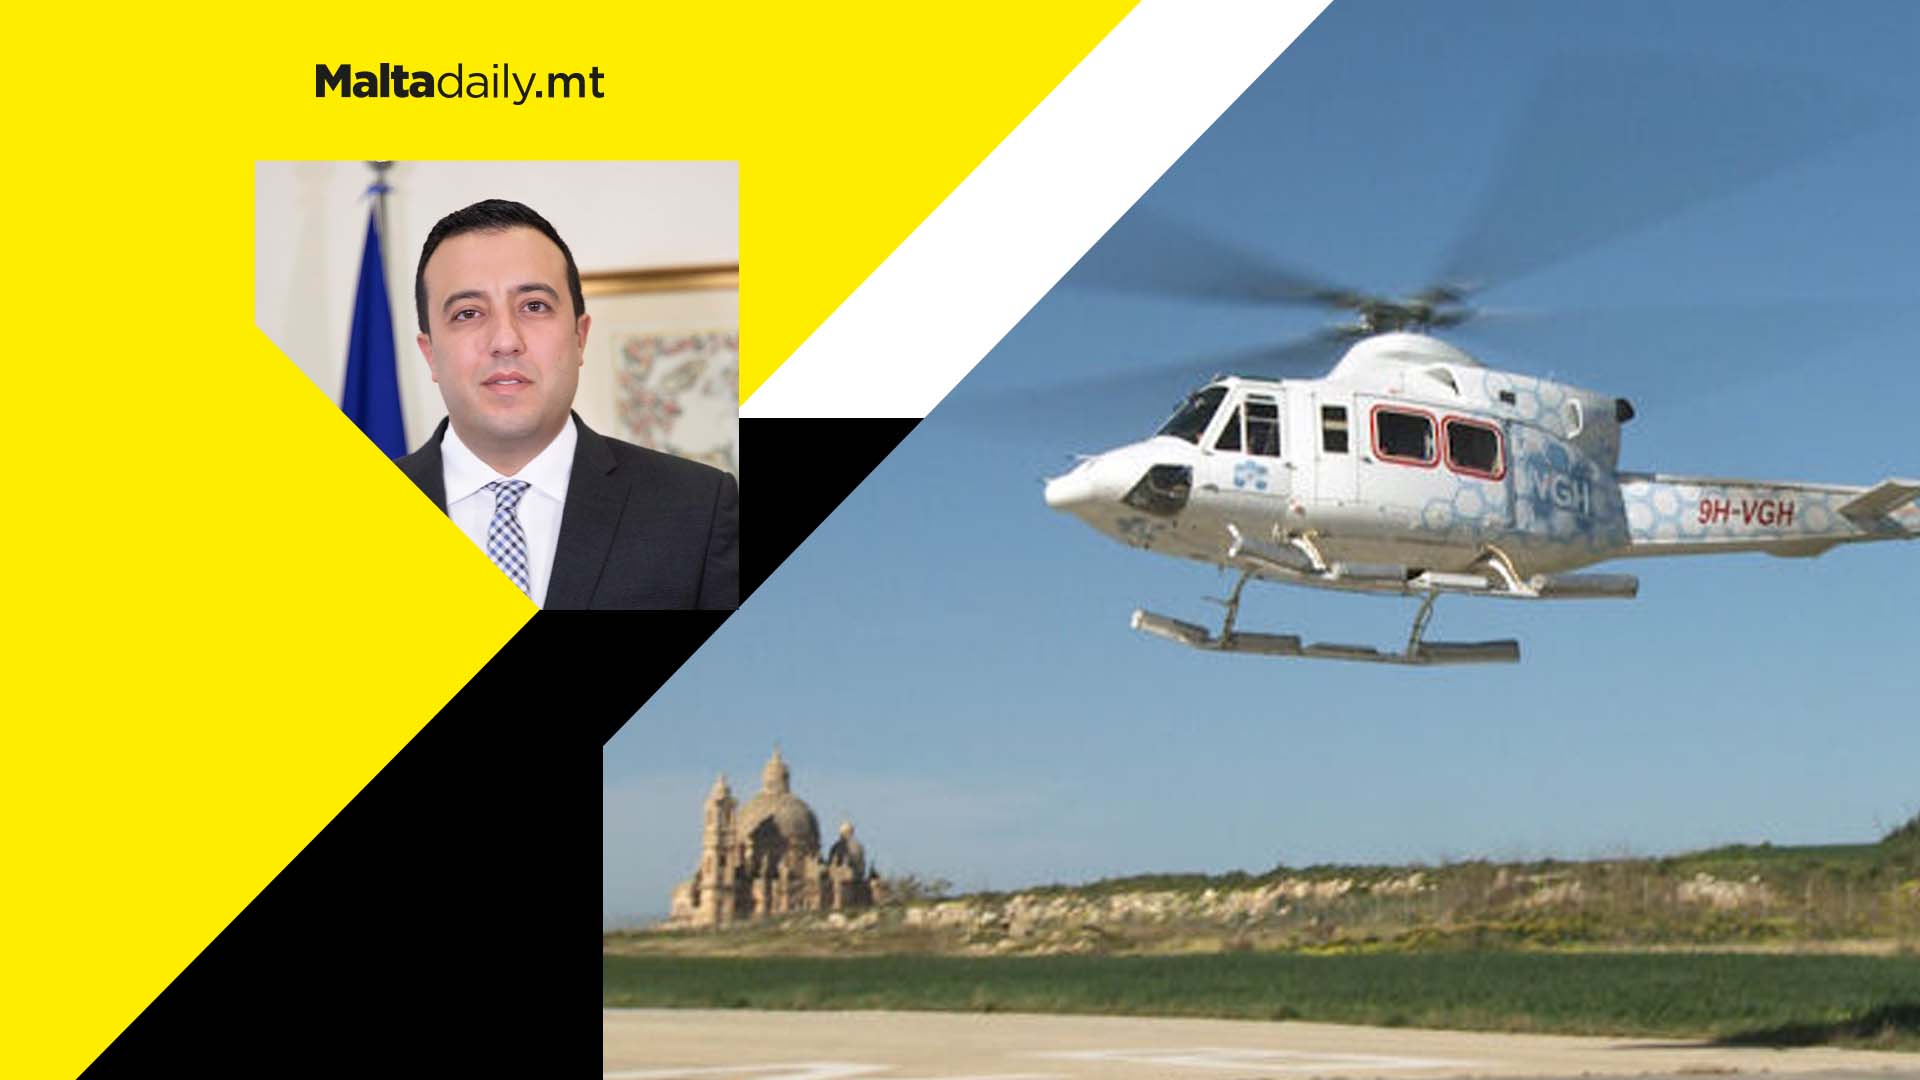 Gozo regional airport proposal officially tabled in parliament